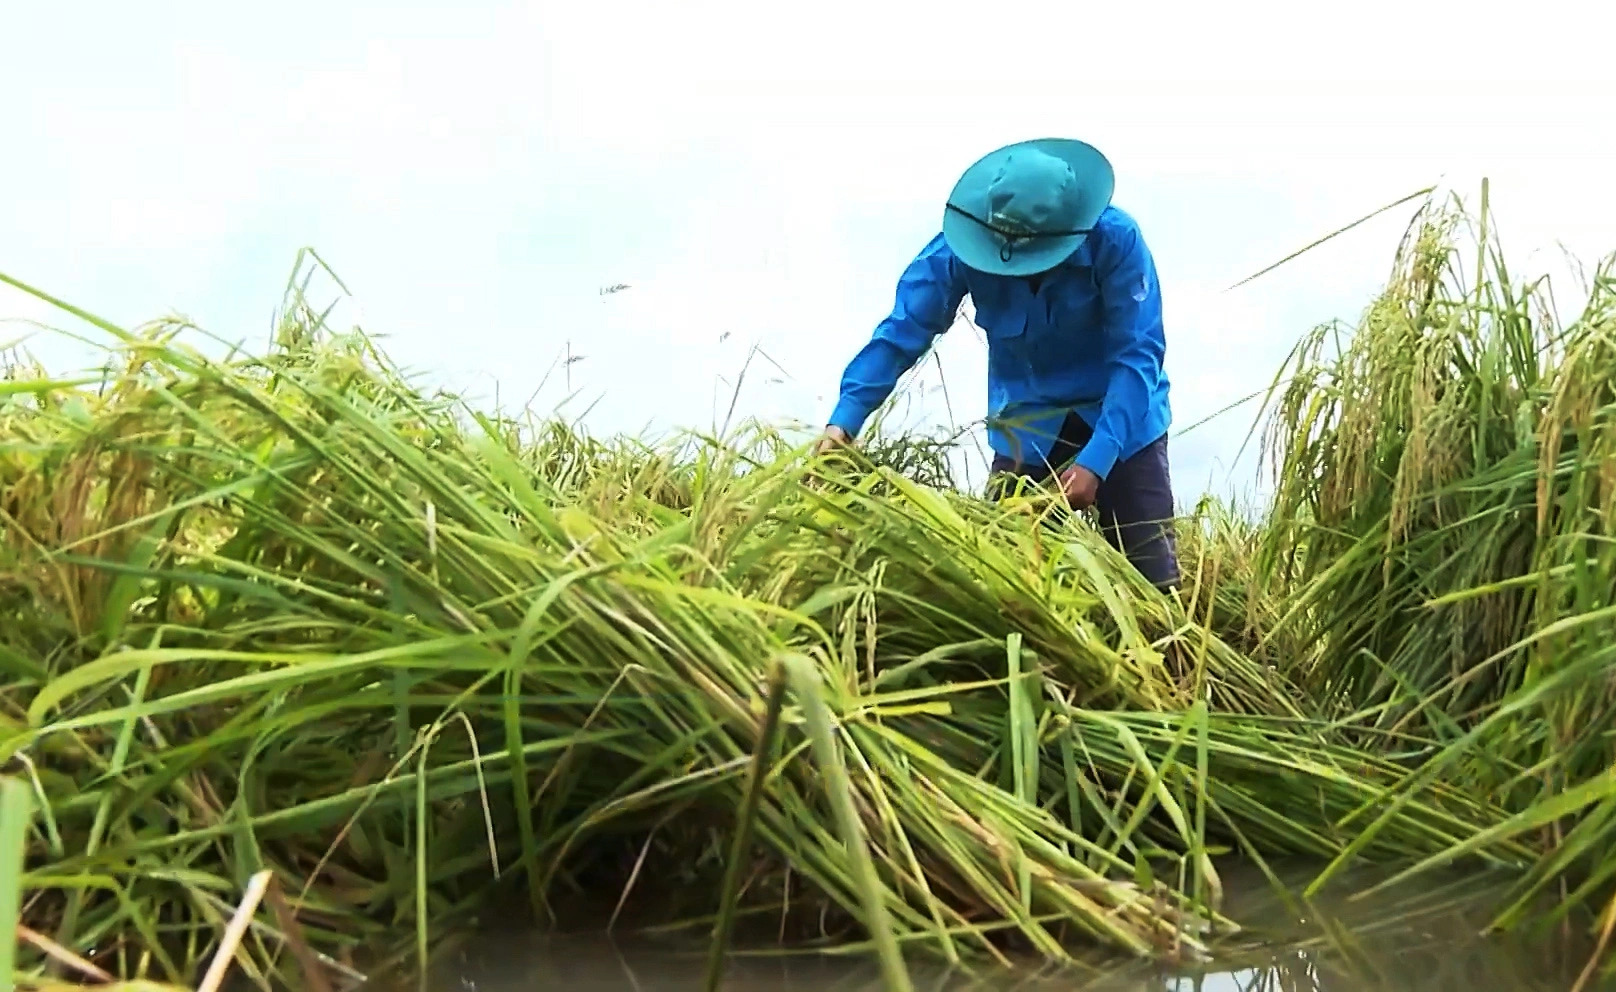 Downpours take toll on over 500ha of rice fields in southern Vietnam